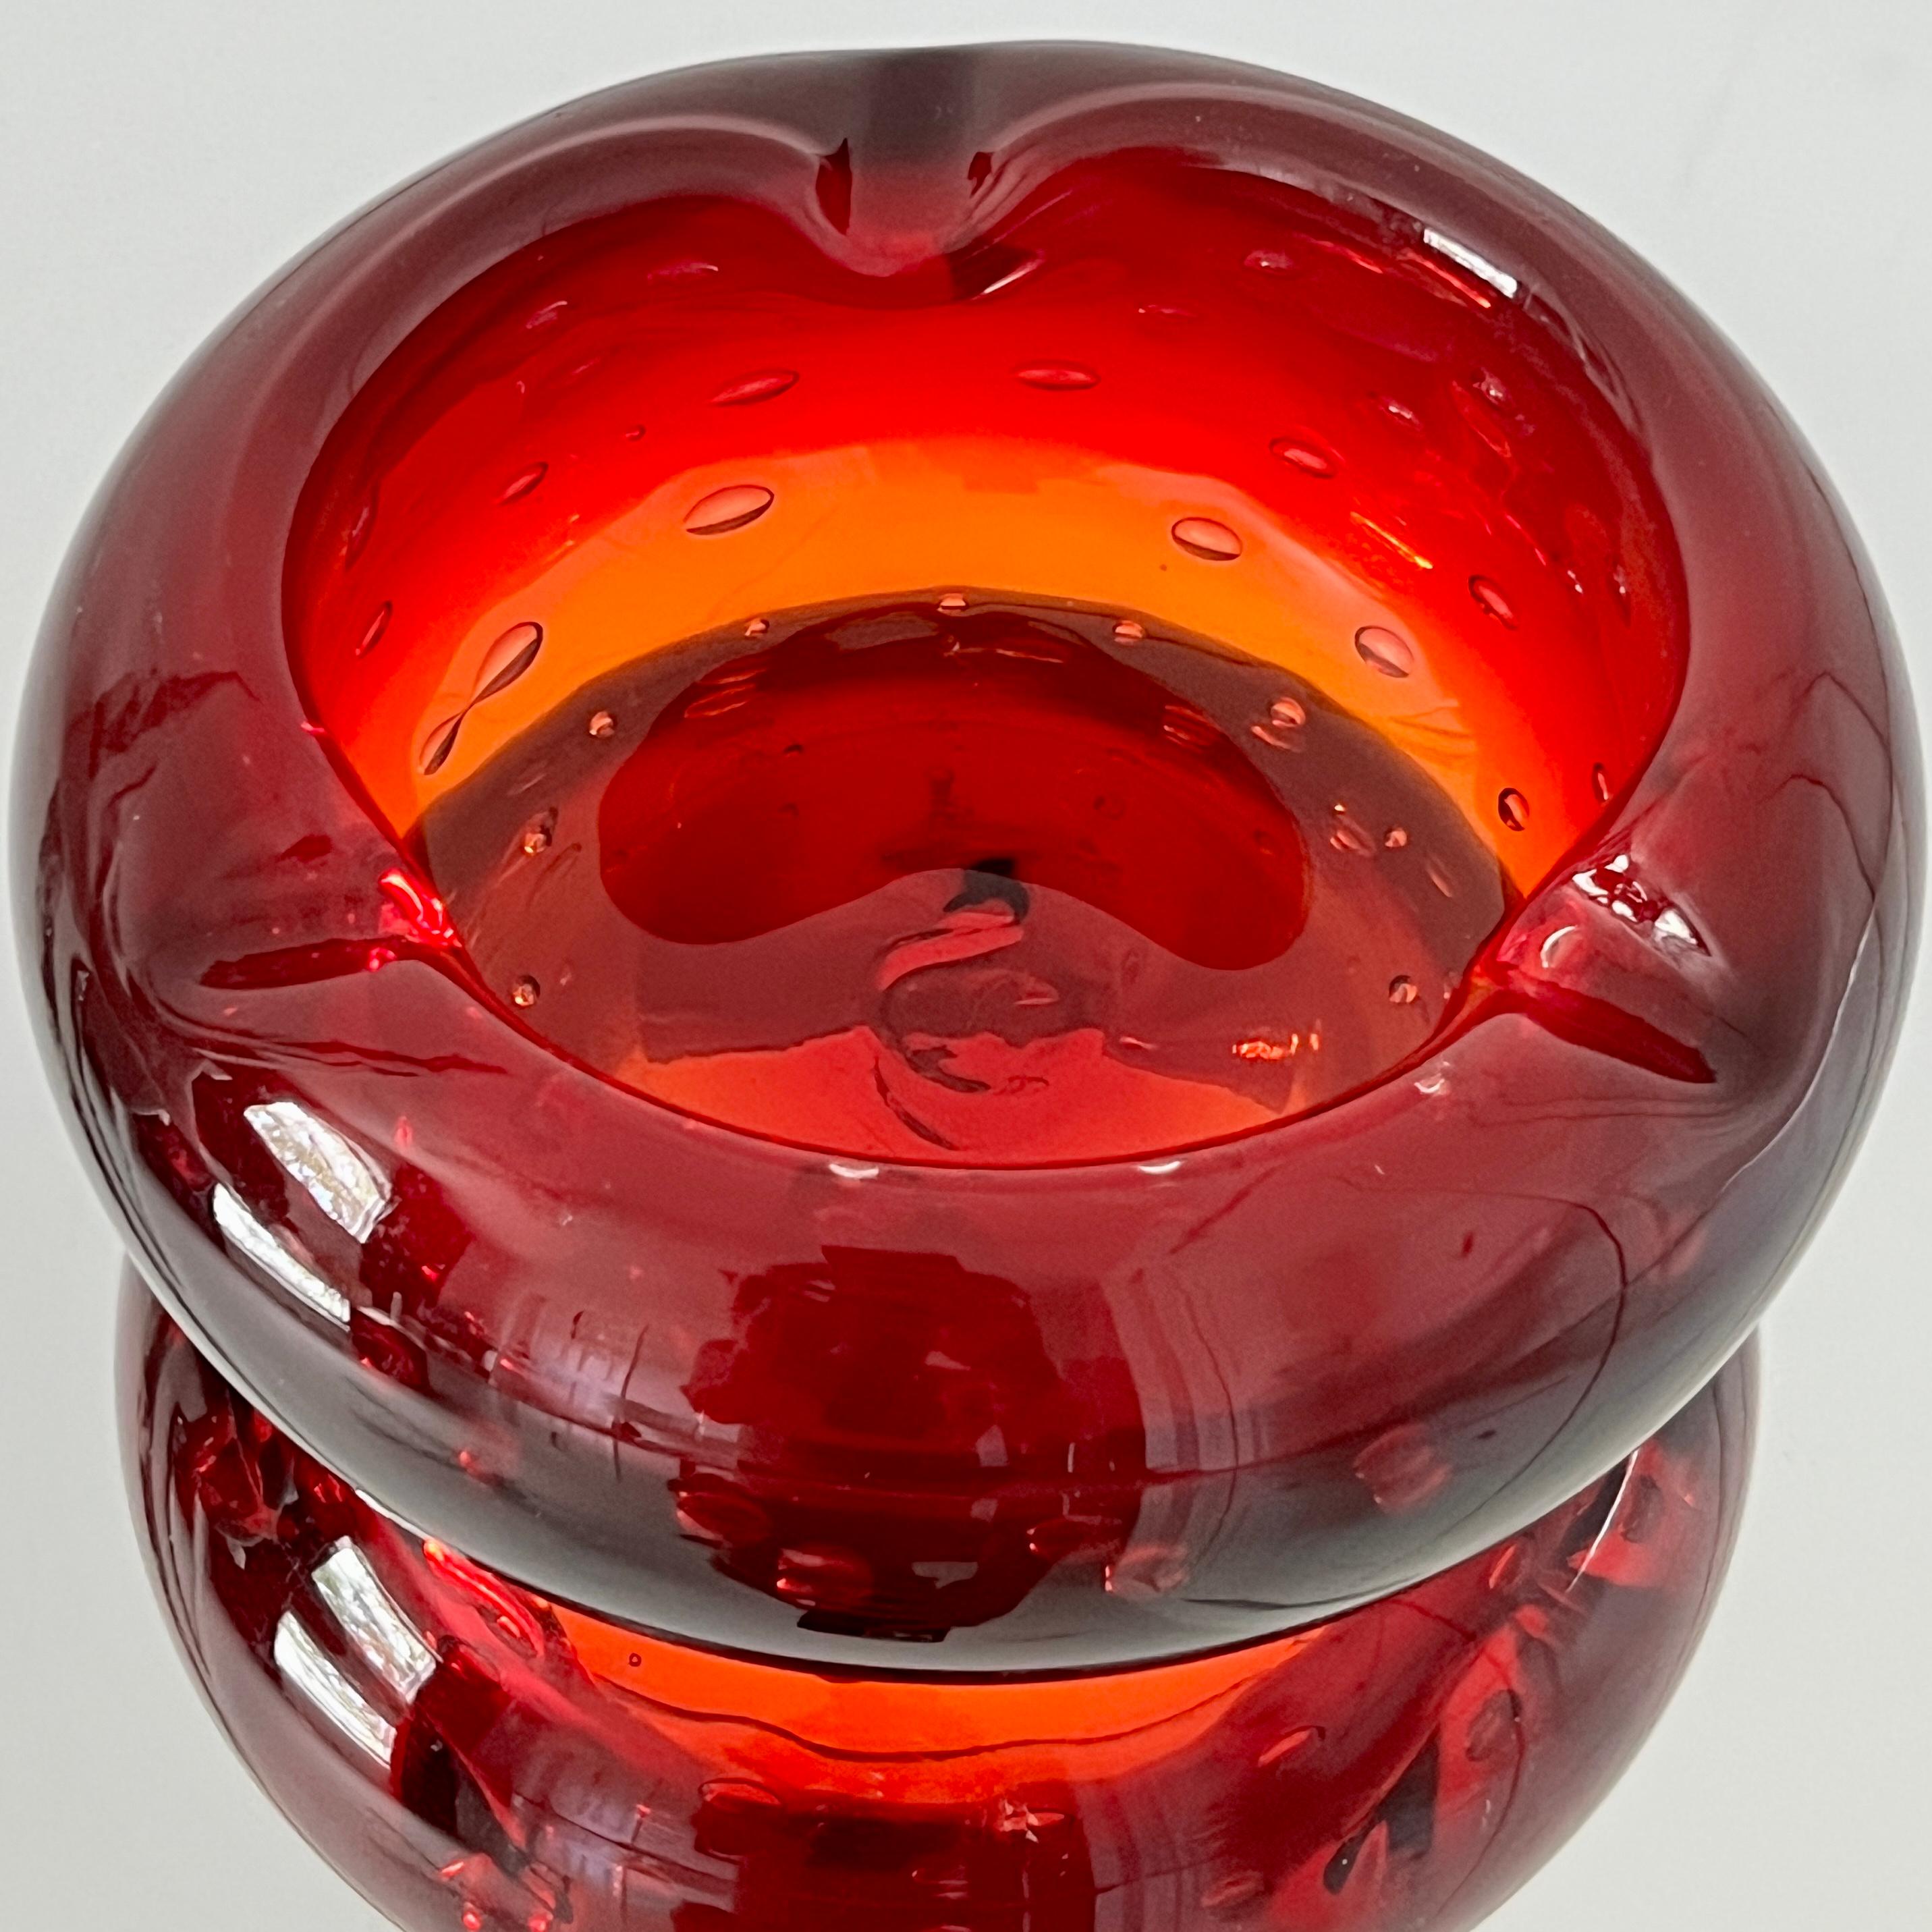 Red Orange Murano Ashtray with Controlled Bubble Design by Seguso, circa 1950s In Good Condition For Sale In Fort Lauderdale, FL